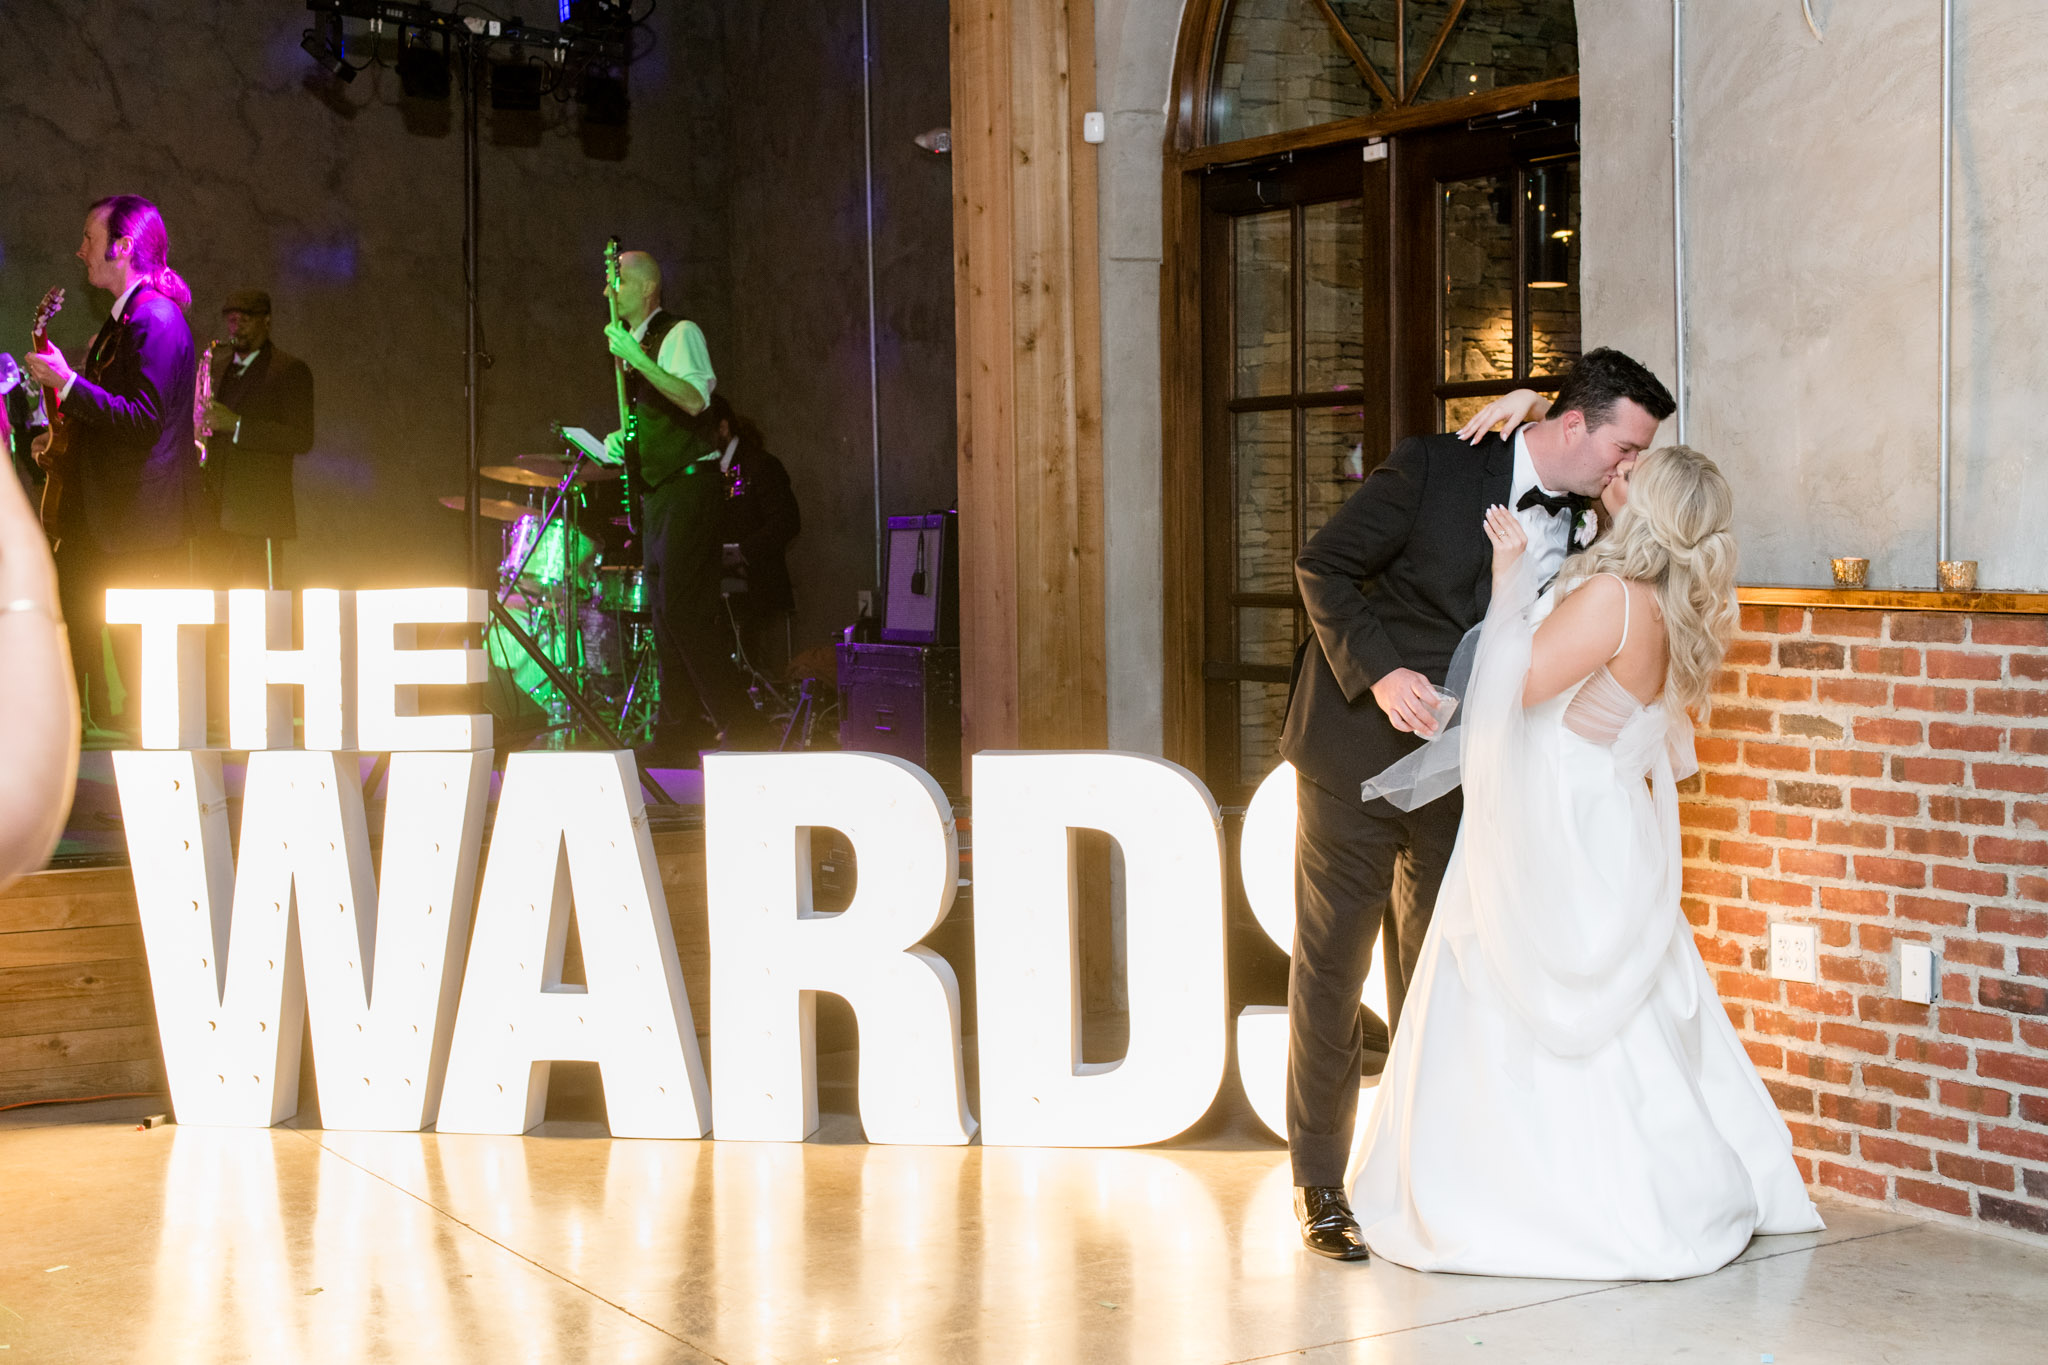 Bride and groom kiss next to light up marque letters.